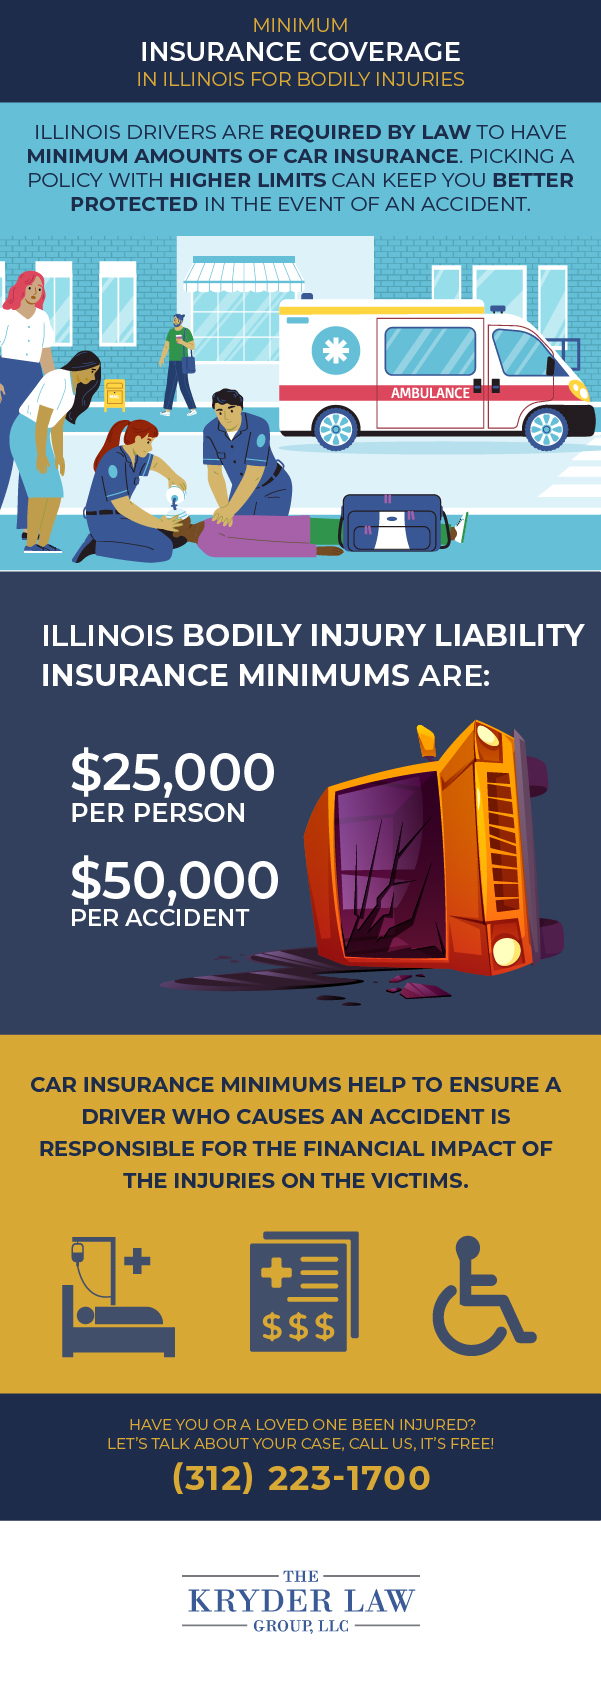 Minimum Insurance Coverage in Illinois for Bodily Injuries